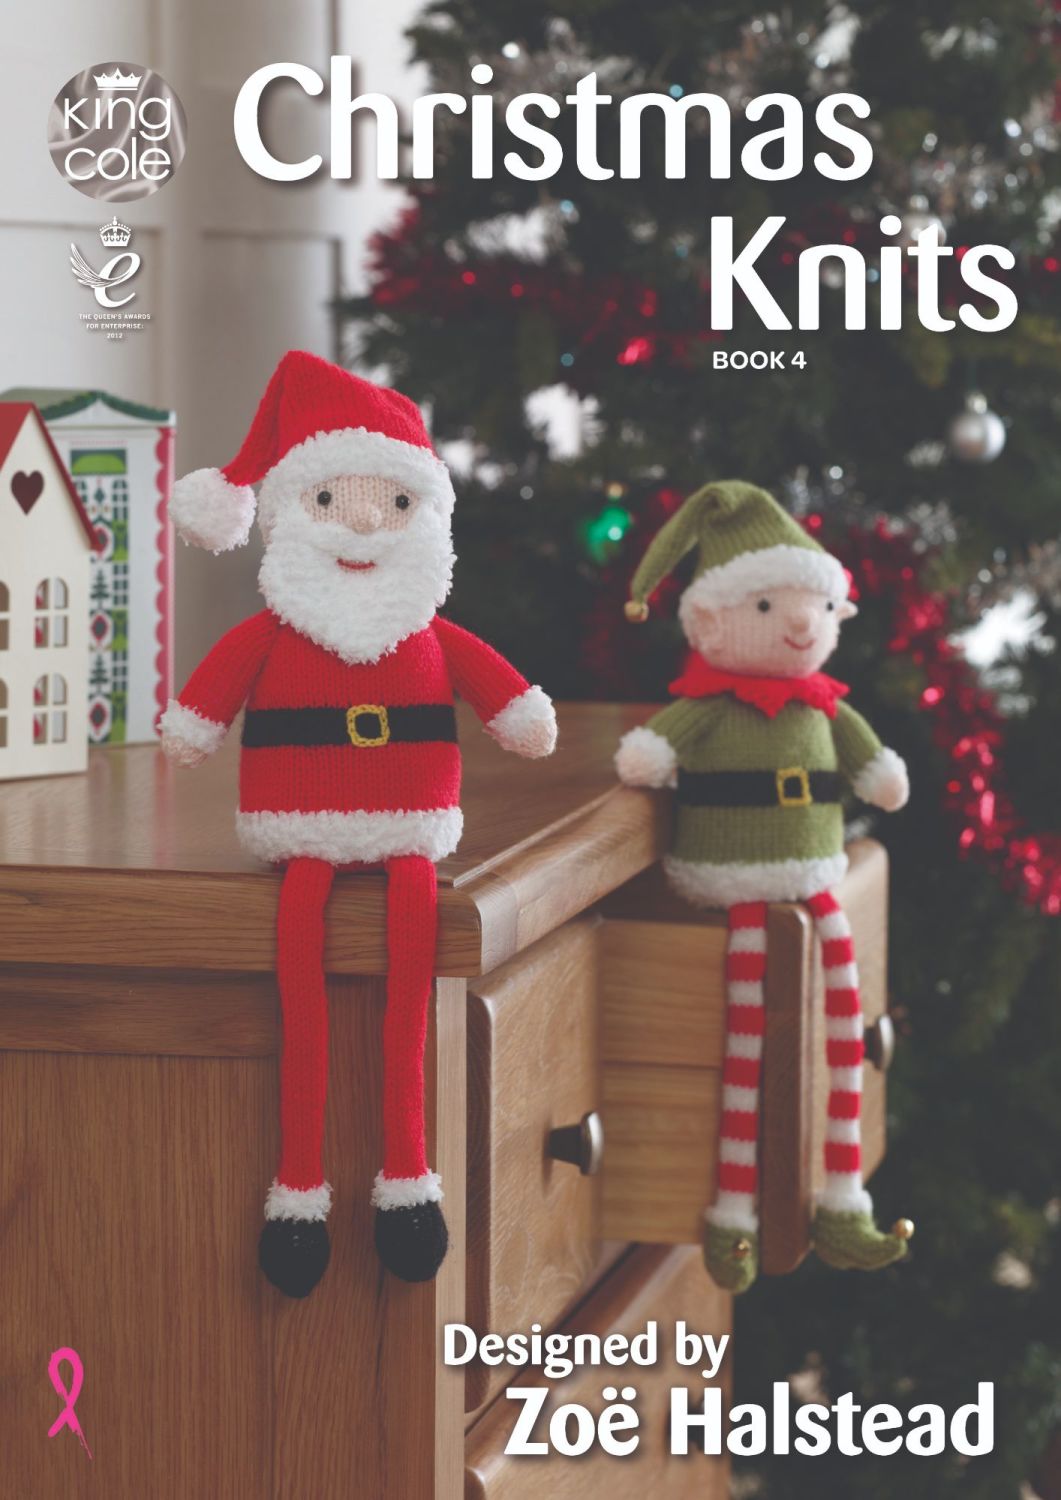 Christmas Knits Book 4 Designed by Zoe Halstead